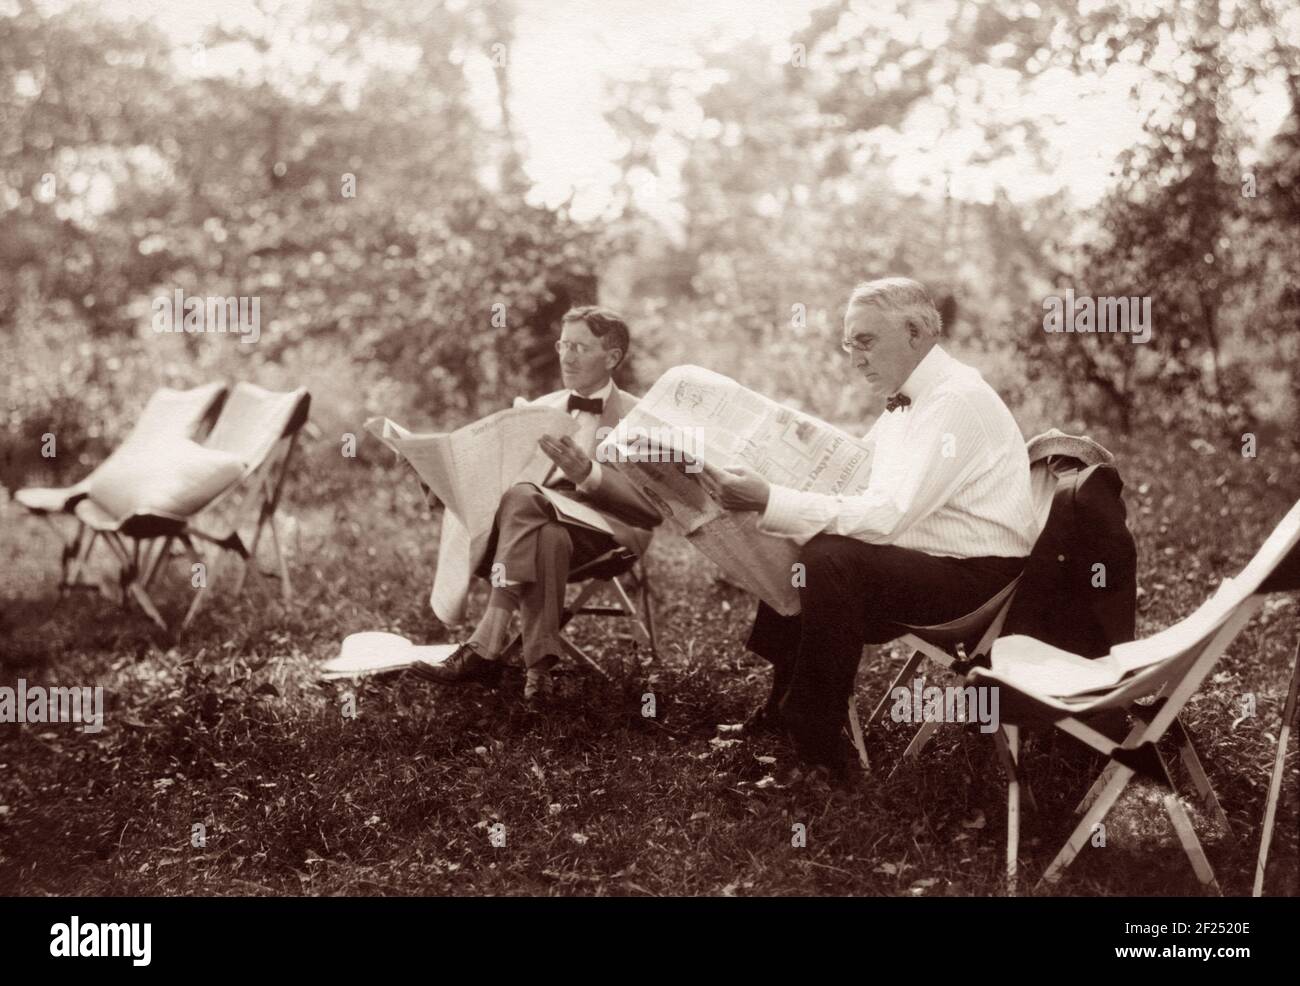 U.S. President Warren G. Harding and Harvey S. Firestone, founder of Firestone Tire & Rubber Company, reading newspapers on a camping trip in Maryland in 1921. Between 1914 and 1924 a group of prominent American leaders and innovators (who dubbed themselves 'the vagabonds') took annual camping trips and adventures around the country. The group included Henry Ford, Thomas Edison, Harvey Firestone, and John Burroughs. In 1921 they were joined by President Warren Harding at a campsite that became known as 'Camp Harding' and Secret Service patrolled the woods surrounding the camp. Stock Photo